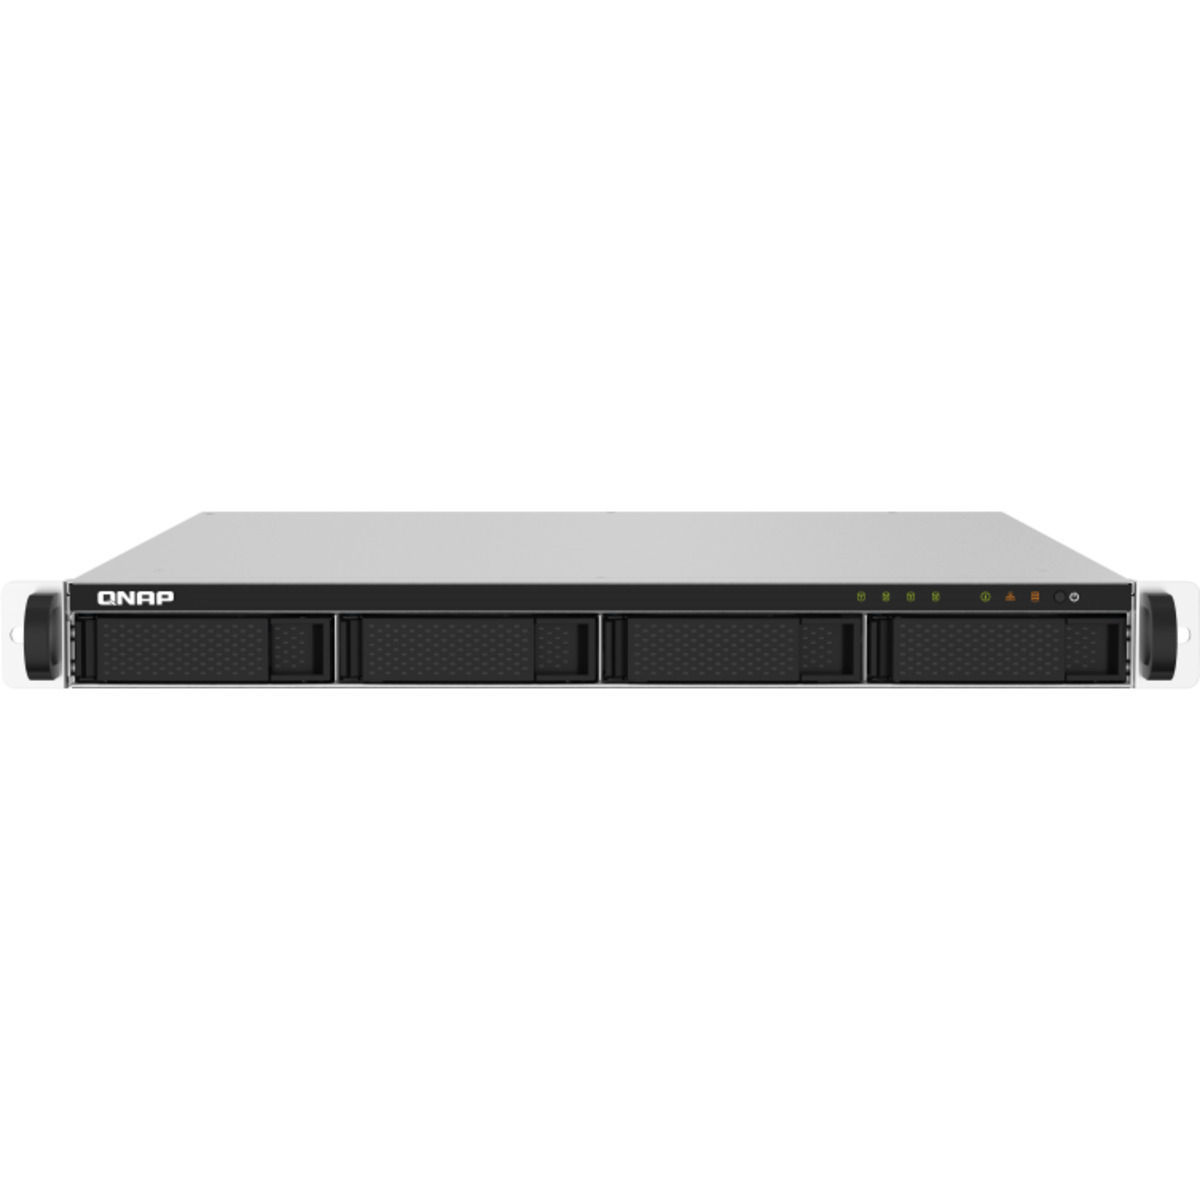 QNAP TS-432PXU-RP 6tb 4-Bay RackMount Personal / Basic Home / Small Office NAS - Network Attached Storage Device 3x2tb Western Digital Red SA500 WDS200T1R0A 2.5 560/530MB/s SATA 6Gb/s SSD NAS Class Drives Installed - Burn-In Tested - FREE RAM UPGRADE TS-432PXU-RP